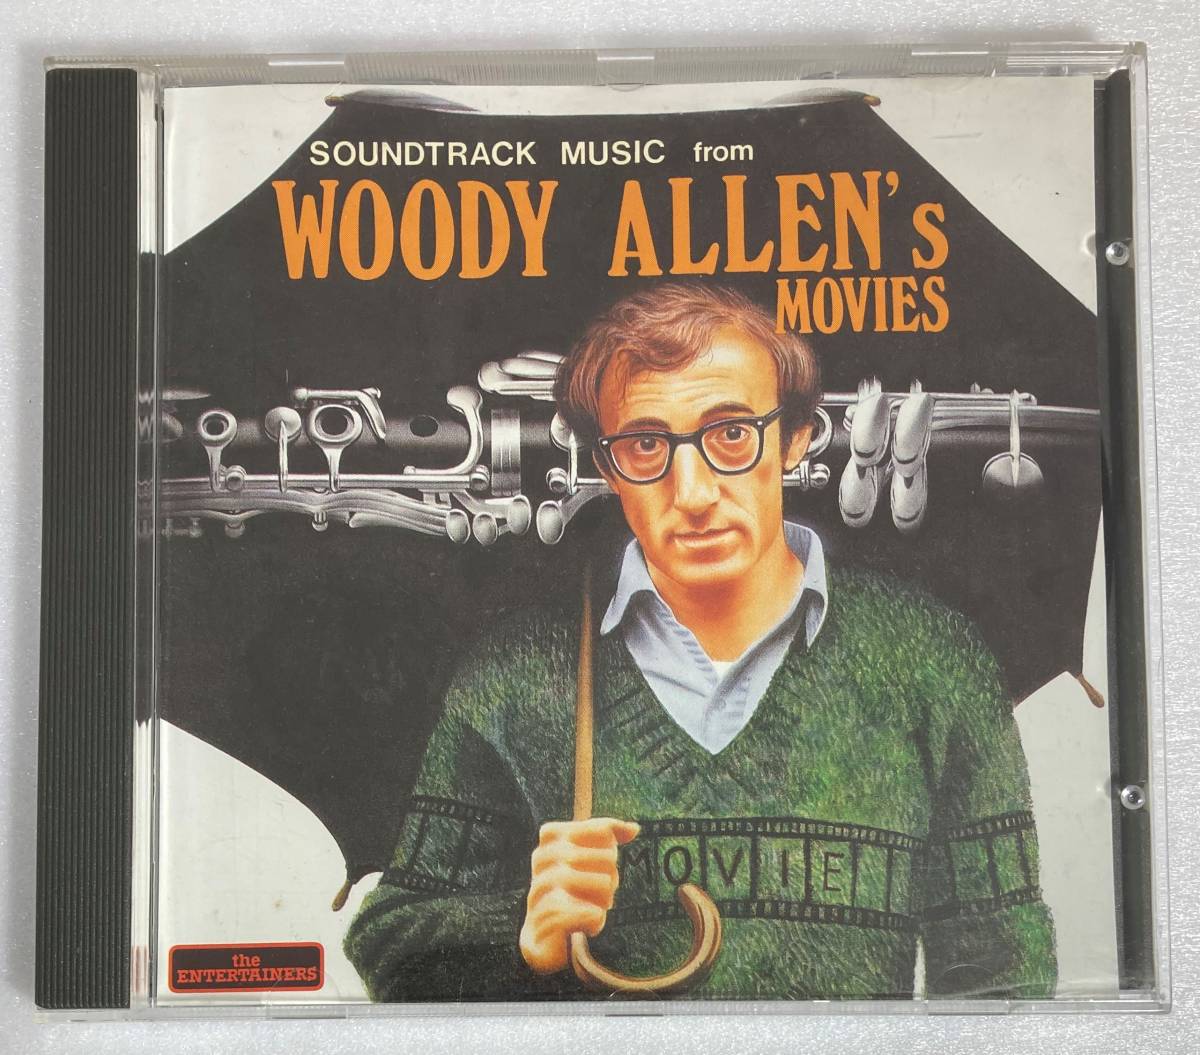 Soundtrack Music from Woody Allen's Movie / EEC盤 The Entertainments CD 275の画像1